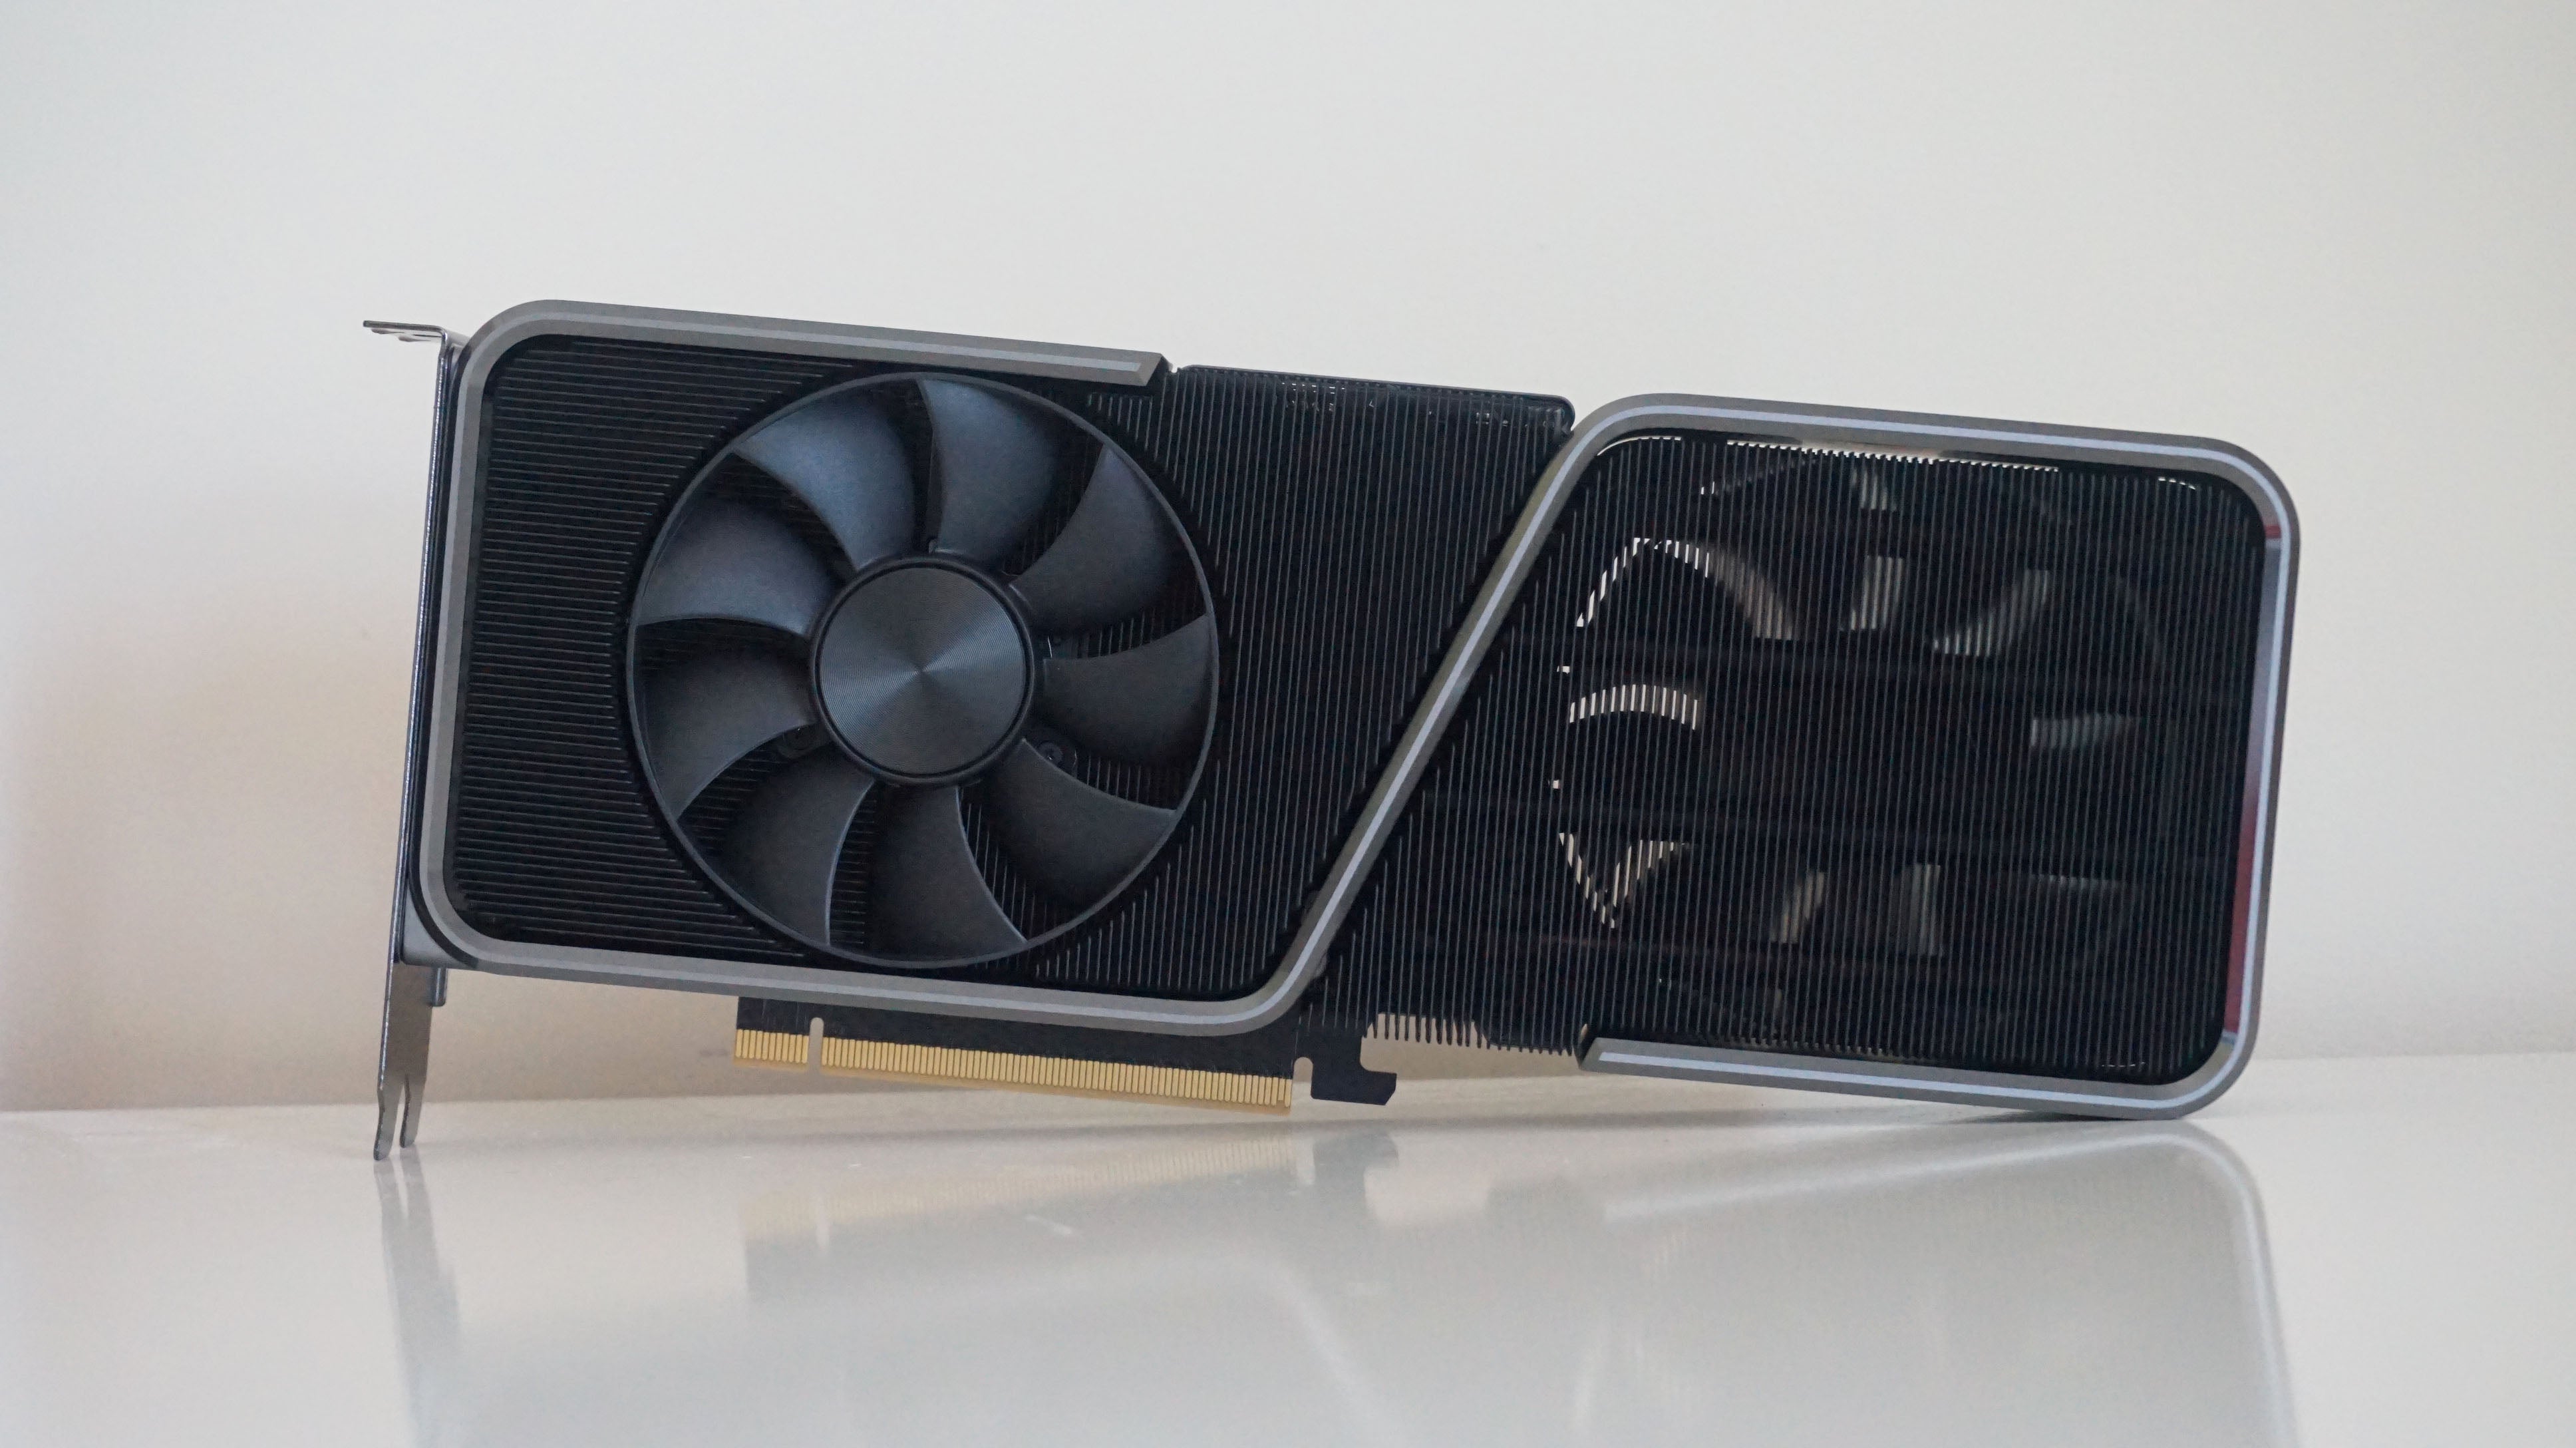 Nvidia RTX 30-series graphics cards go on sale at Best Buy bricks-and-mortar stores tomorrow - Rock Paper Shotgun